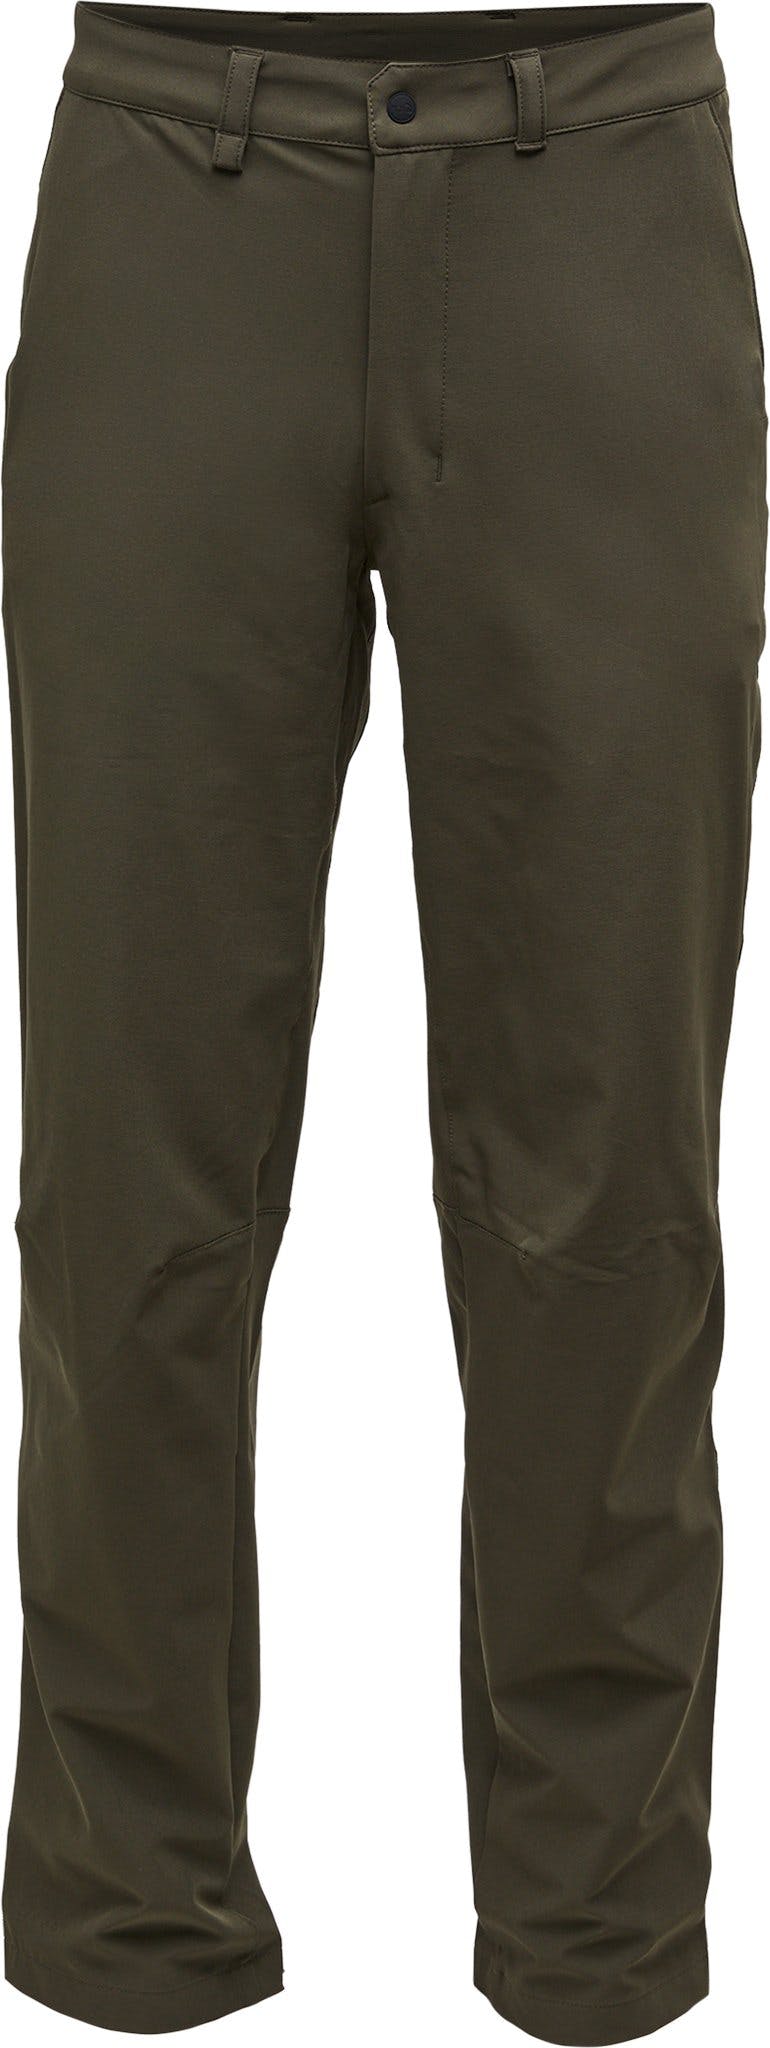 Product image for Paramount Pant - Men's